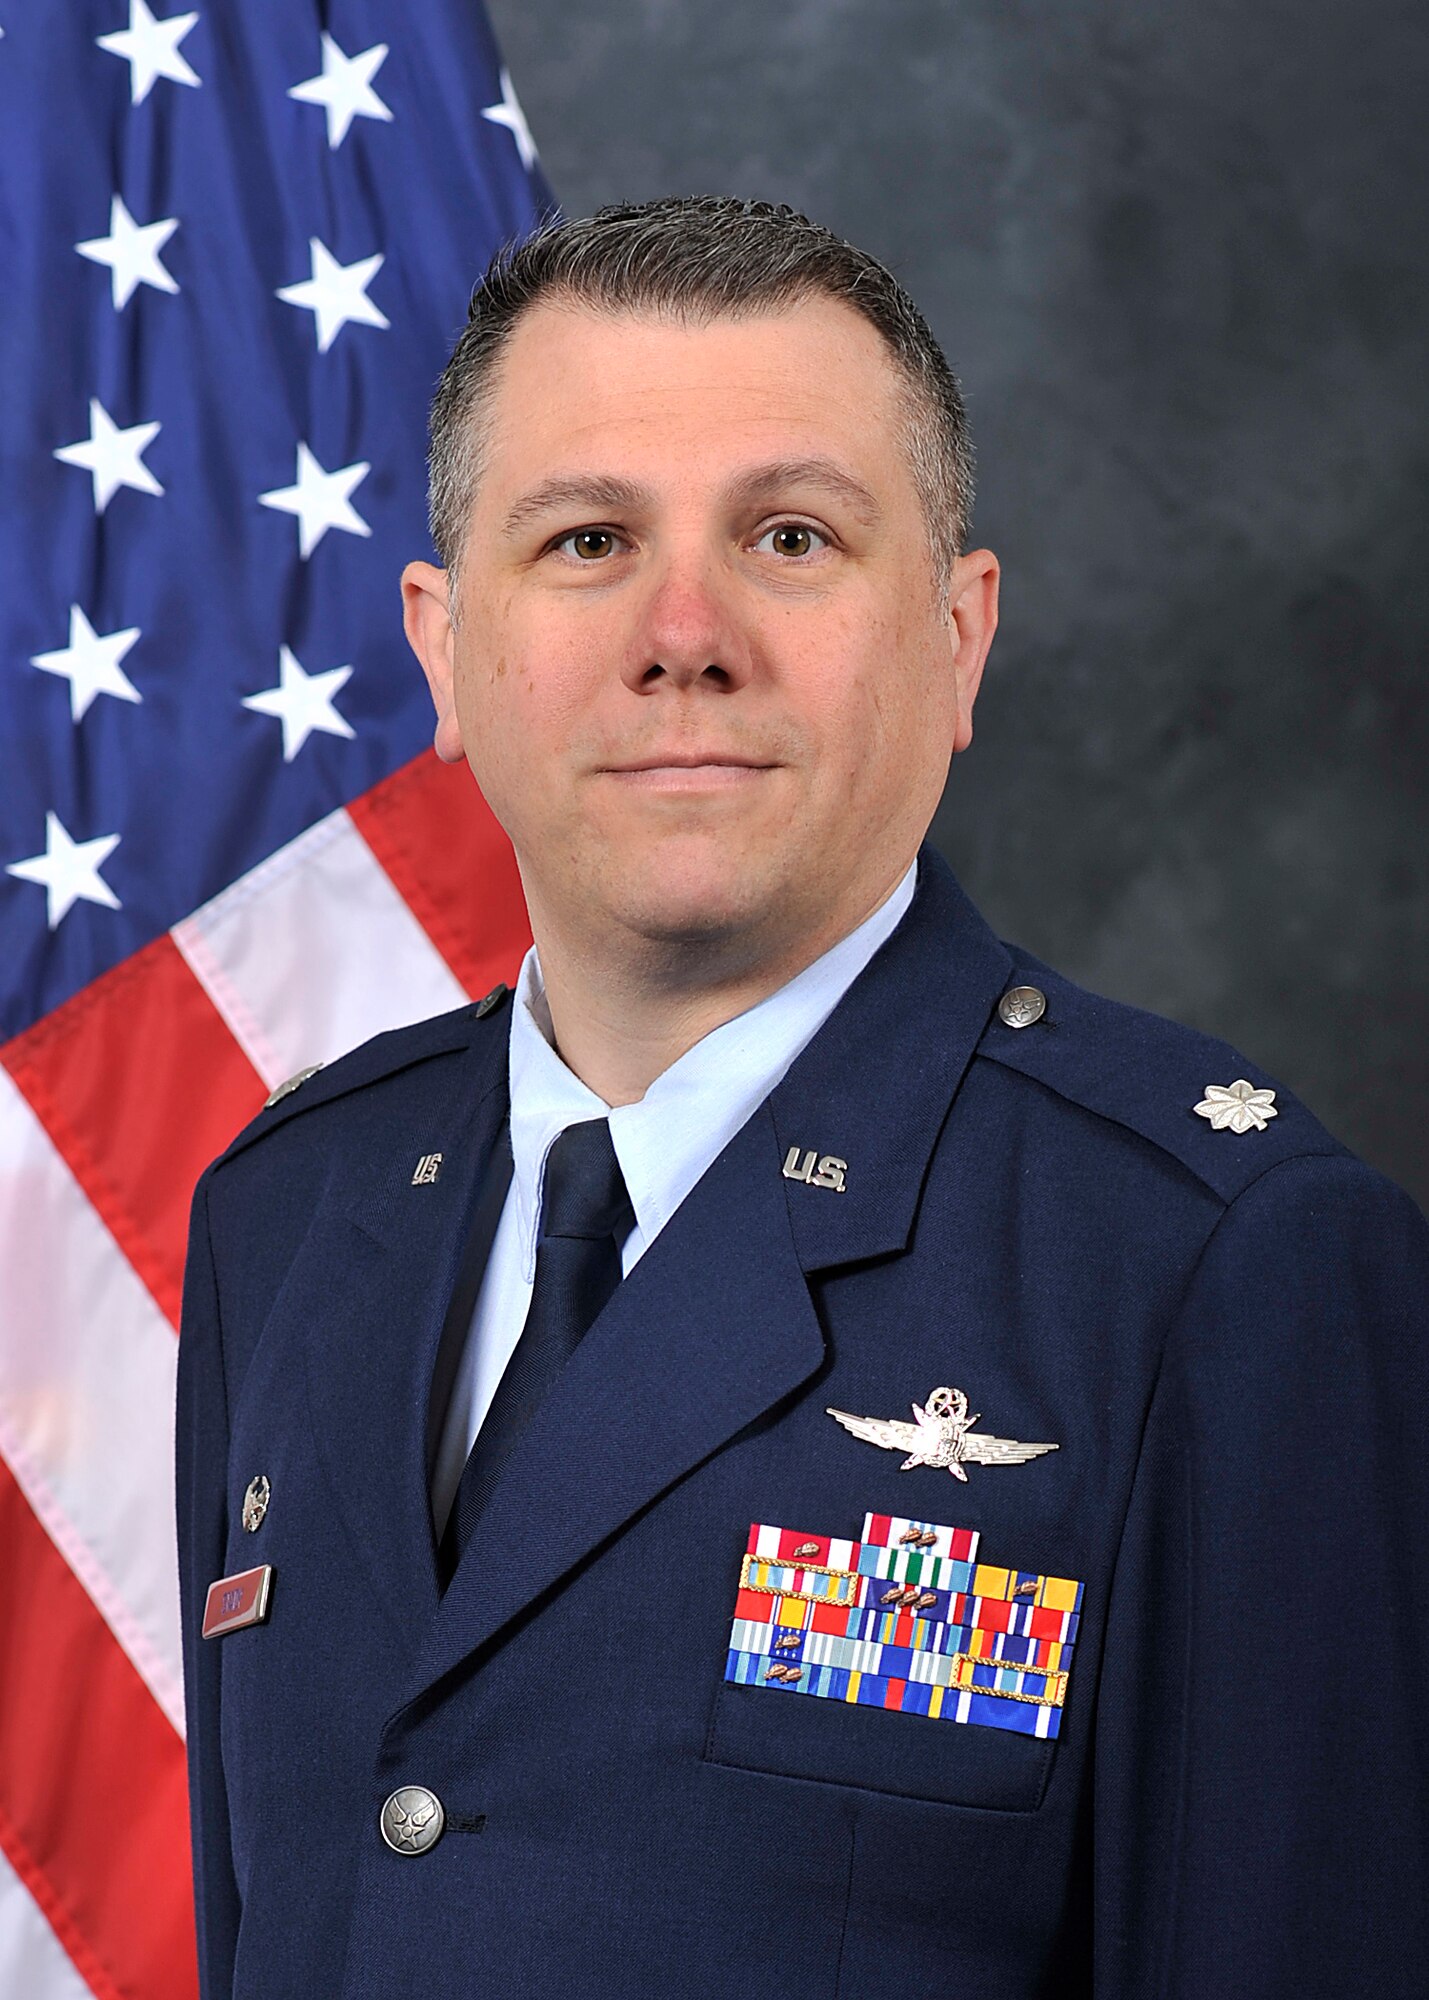 Lt. Col. Thomas Stady, 60th Communication Squadron Commander, official photo.